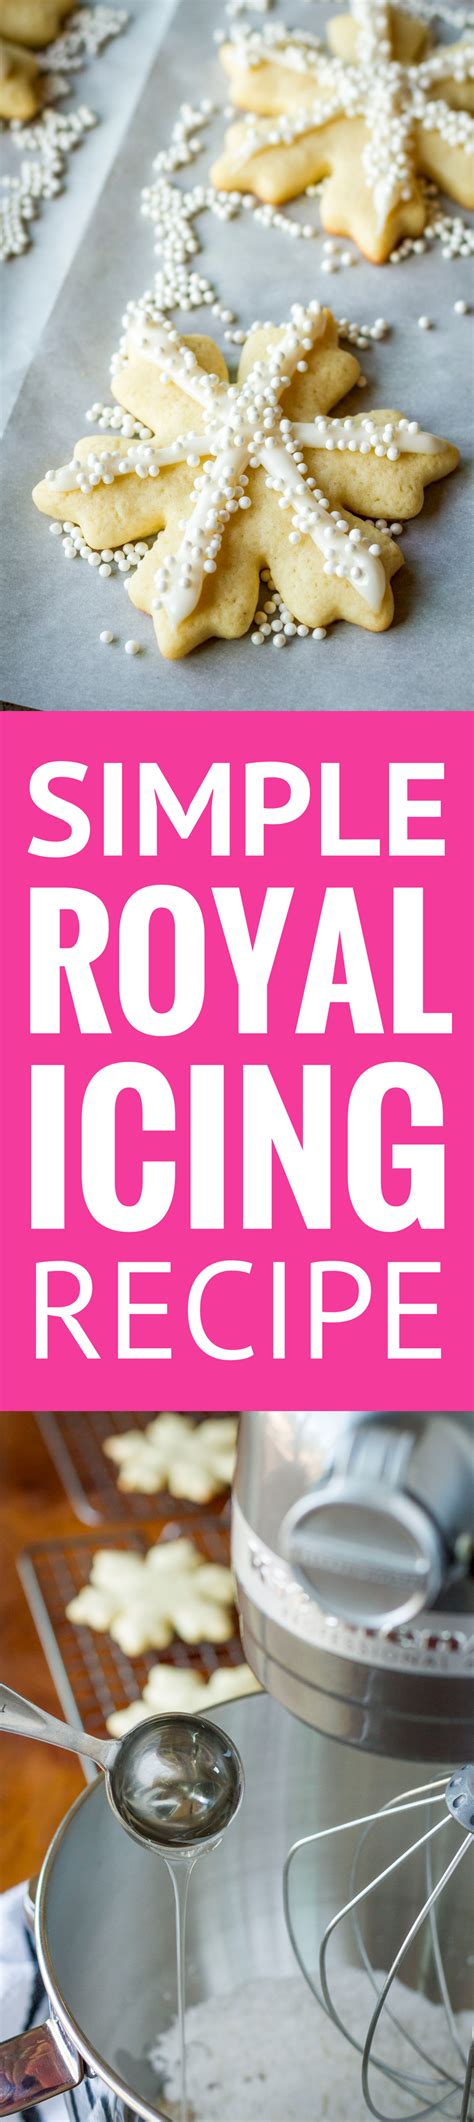 2 trying royal icing with meringue powder 3 making royal icing without egg whites for icing to be used as piping, mix the royal icing until soft peaks. Royal Icing Without Meringue Powder Or Corn Syrup Or Eggs : Royal Icing without Egg Whites or ...